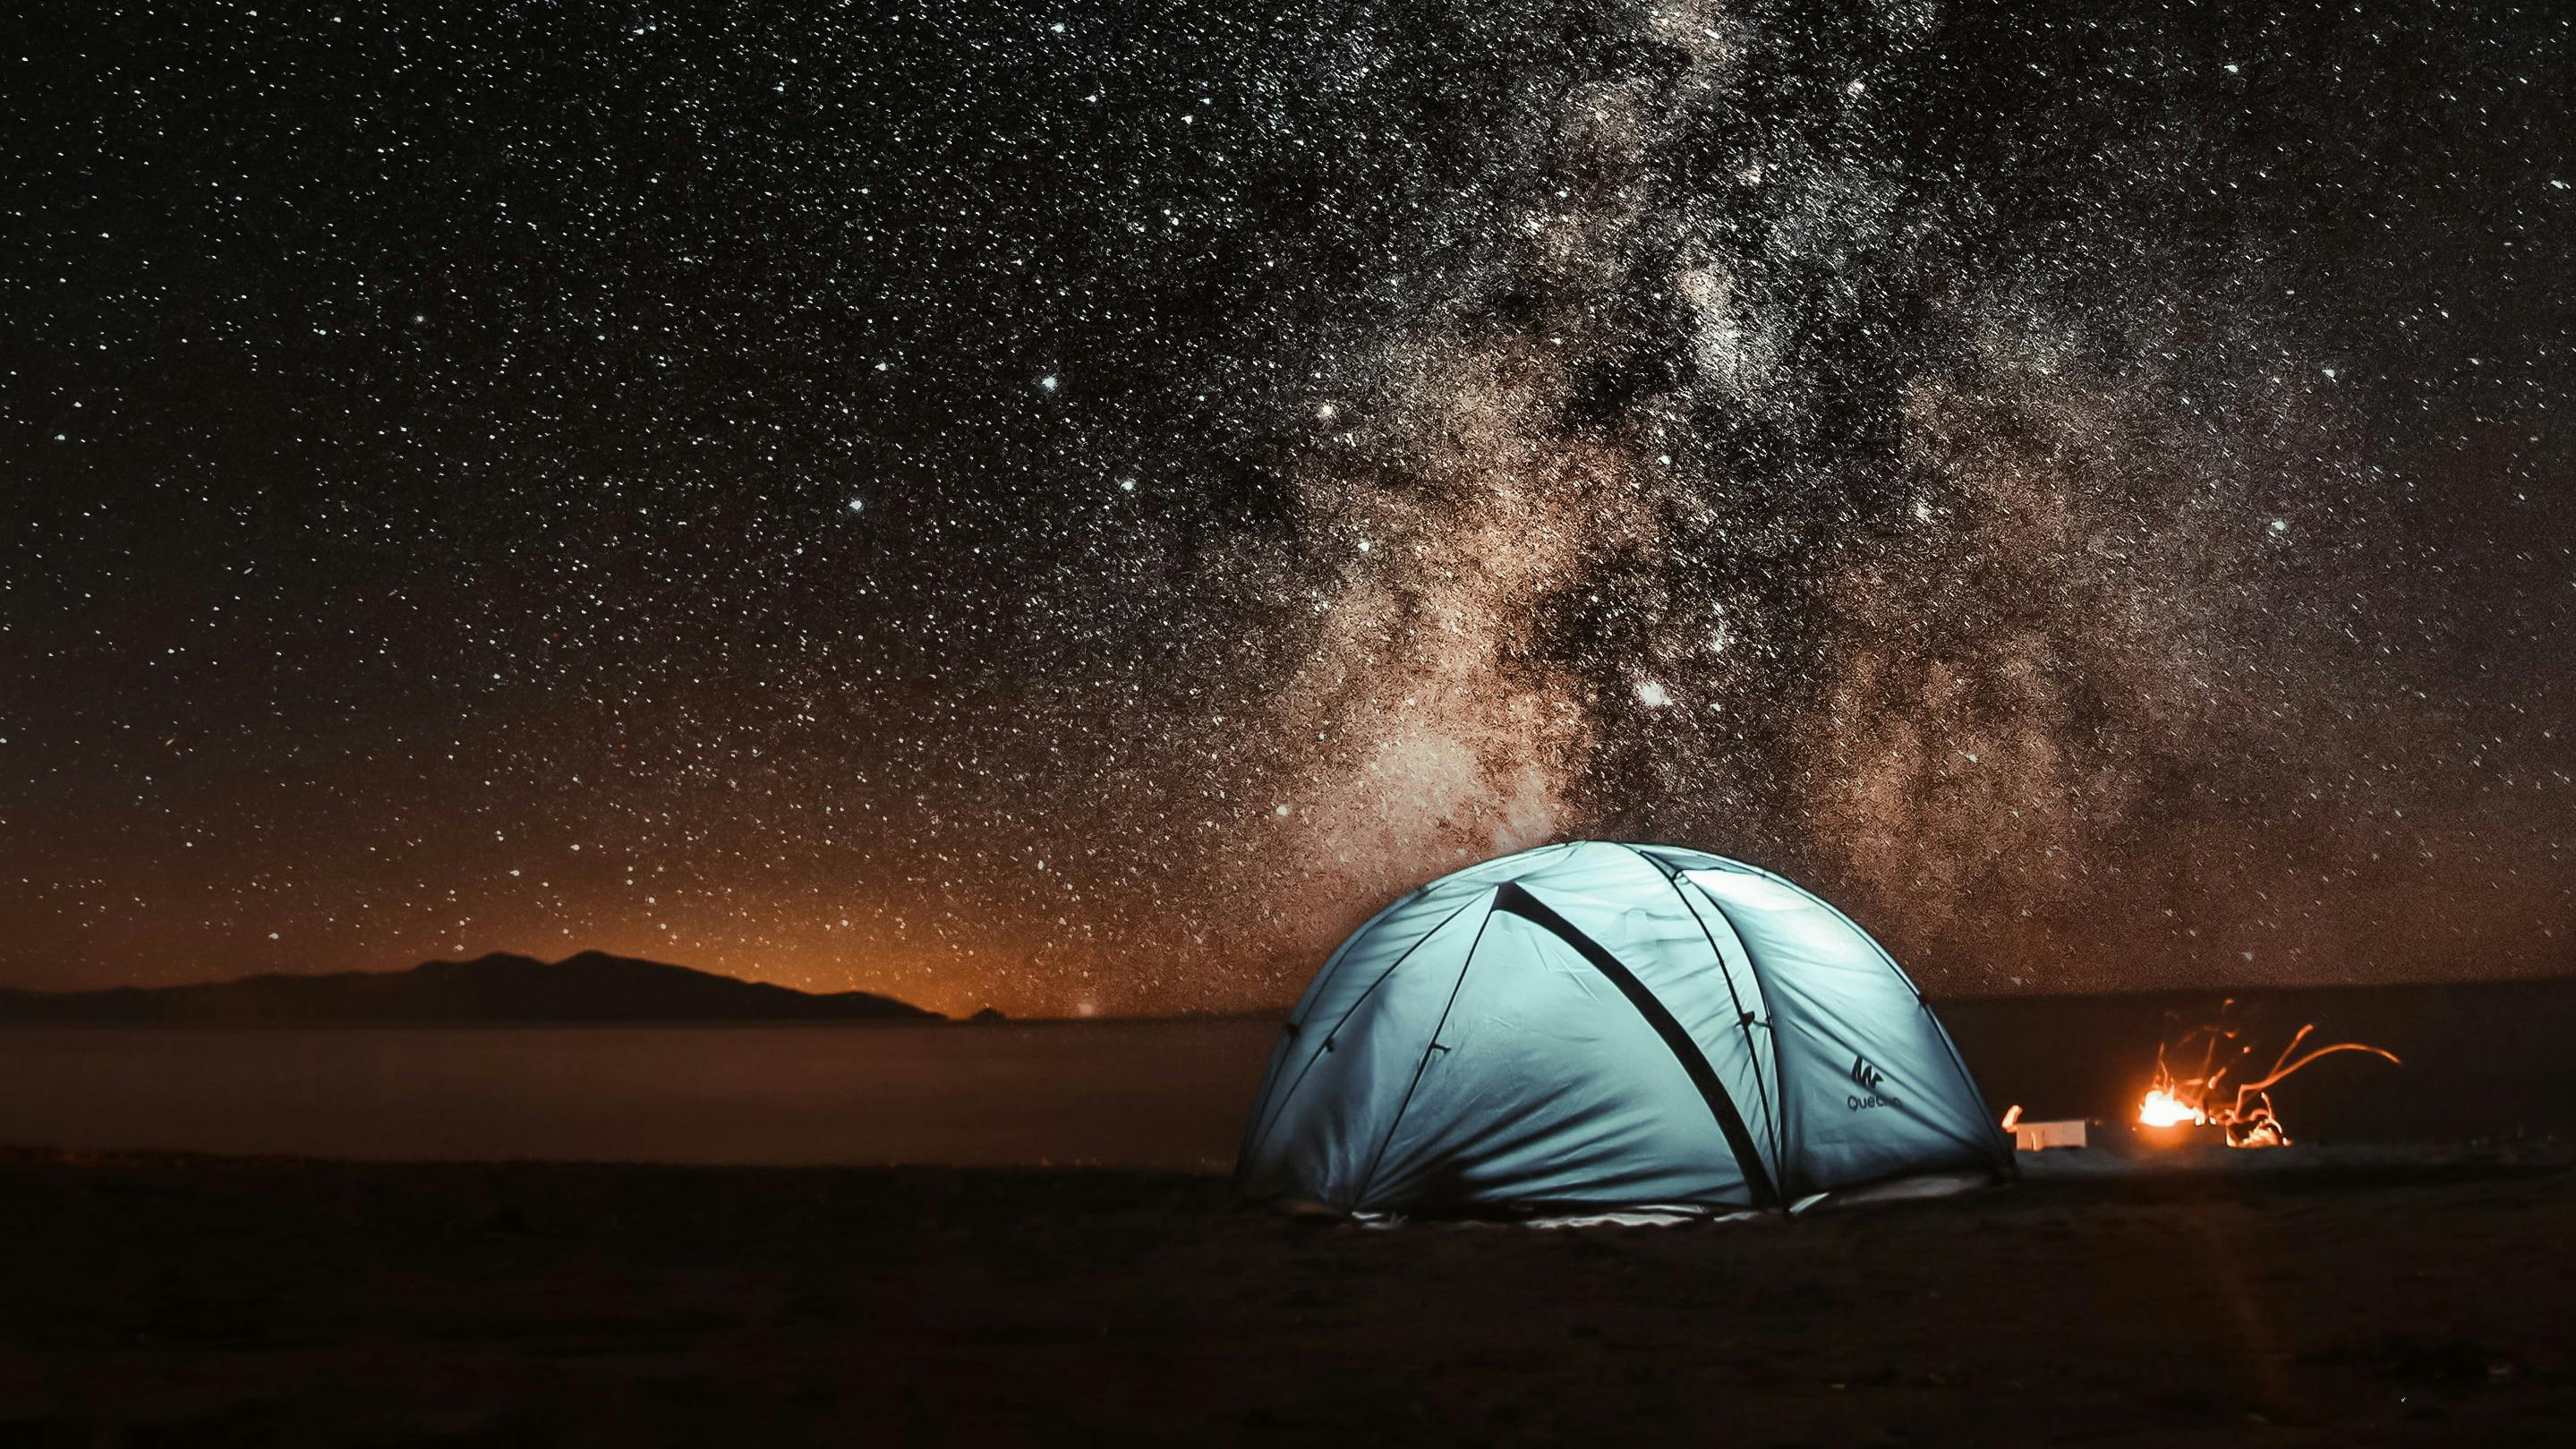 A brightly lit up tent sits in the wilderness against a starry sky